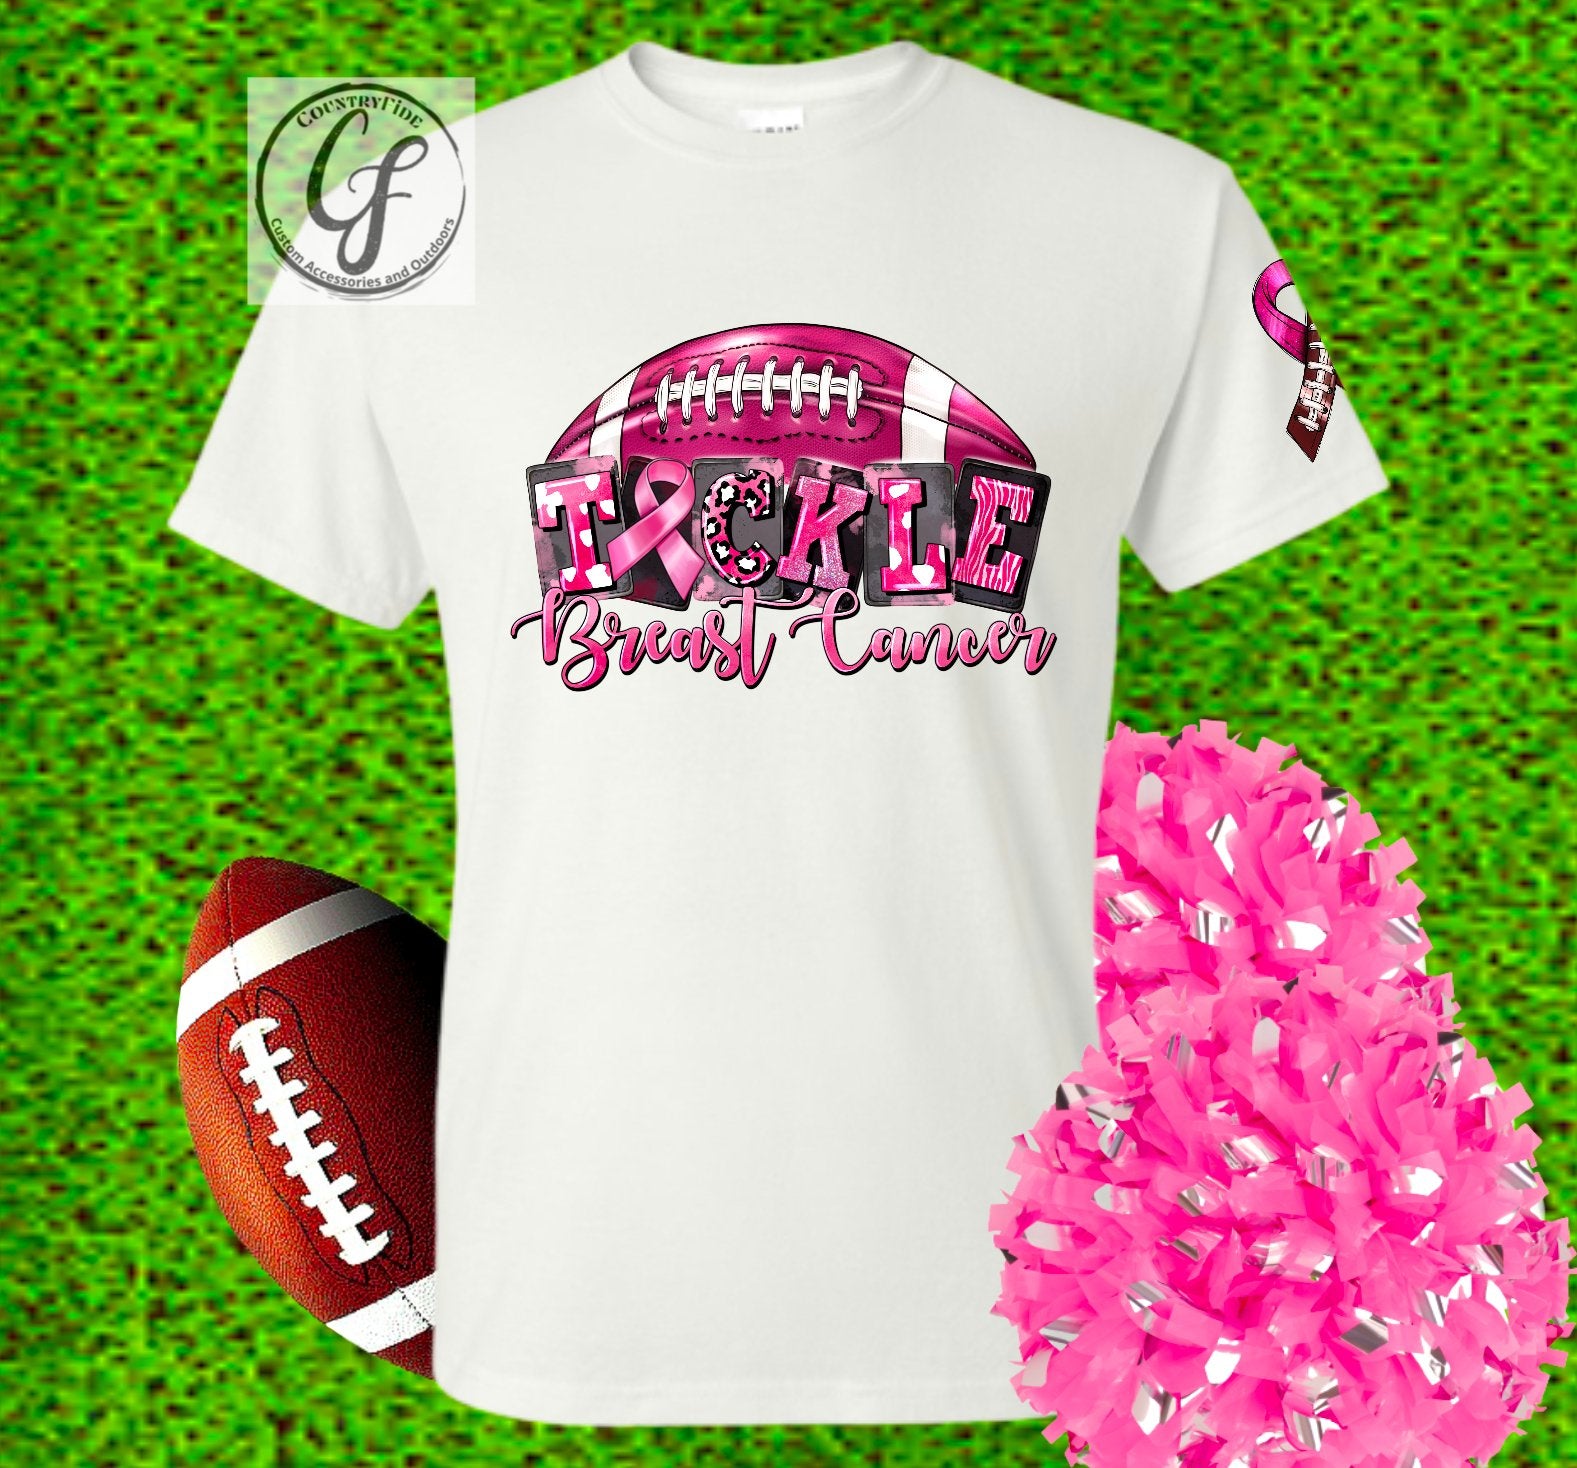 TACKLE BREAST CANCER - CountryFide Custom Accessories and Outdoors